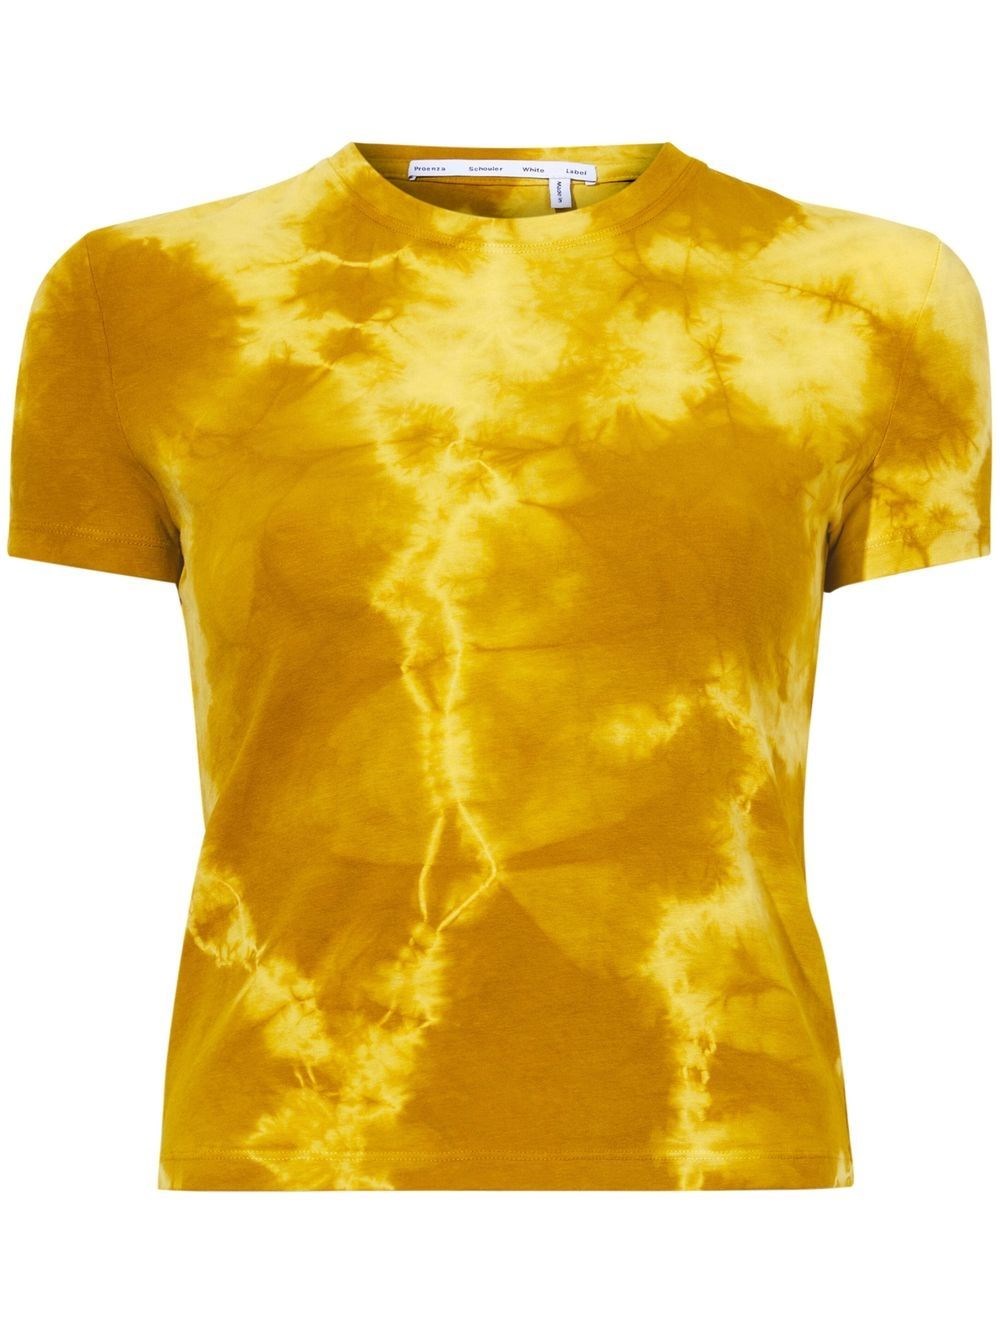 Proenza Schouler White Label Tie Dye T-shirt In Sulfur Muted Lime